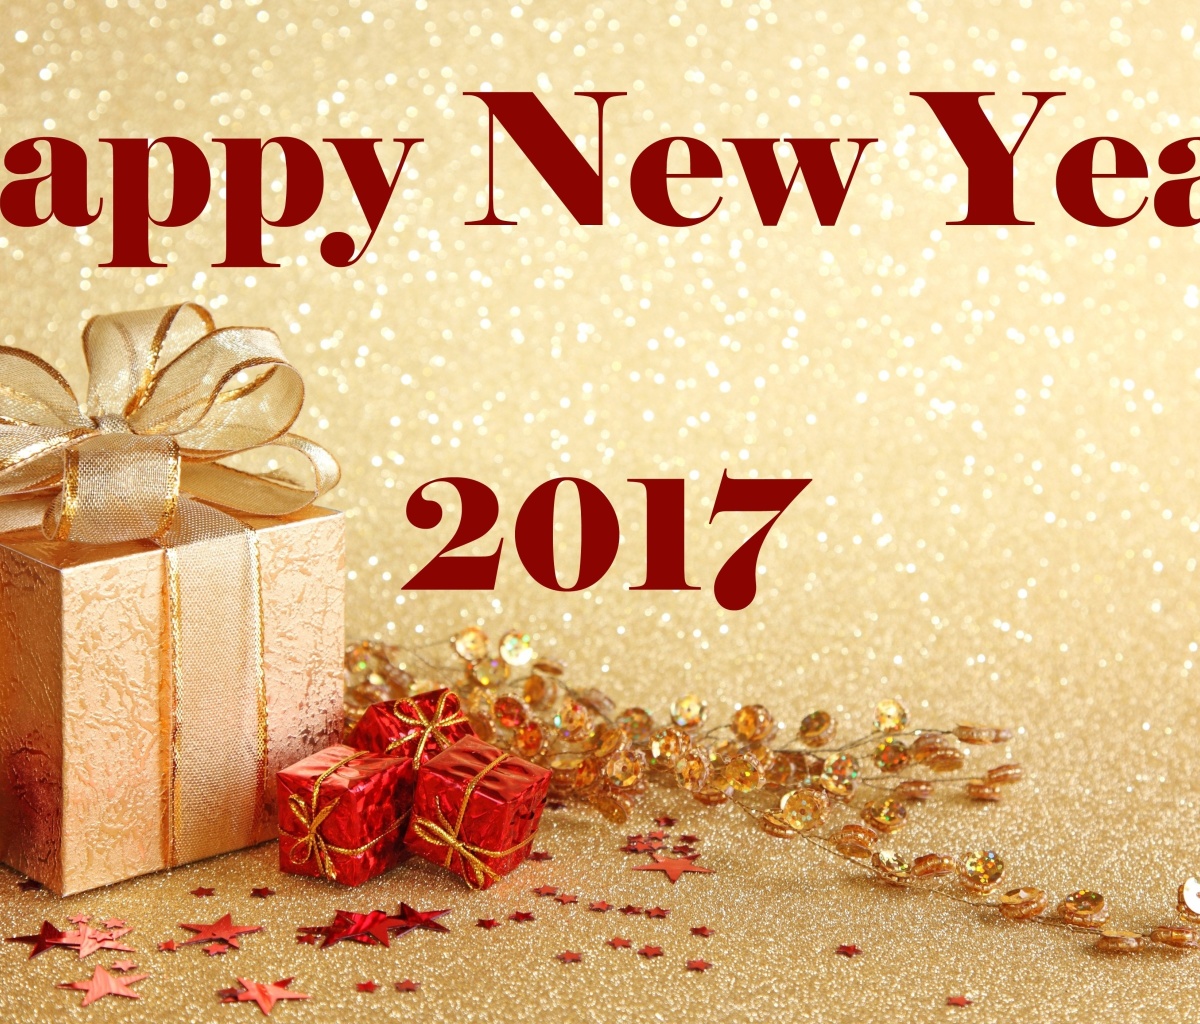 Happy New Year 2017 with Gifts screenshot #1 1200x1024